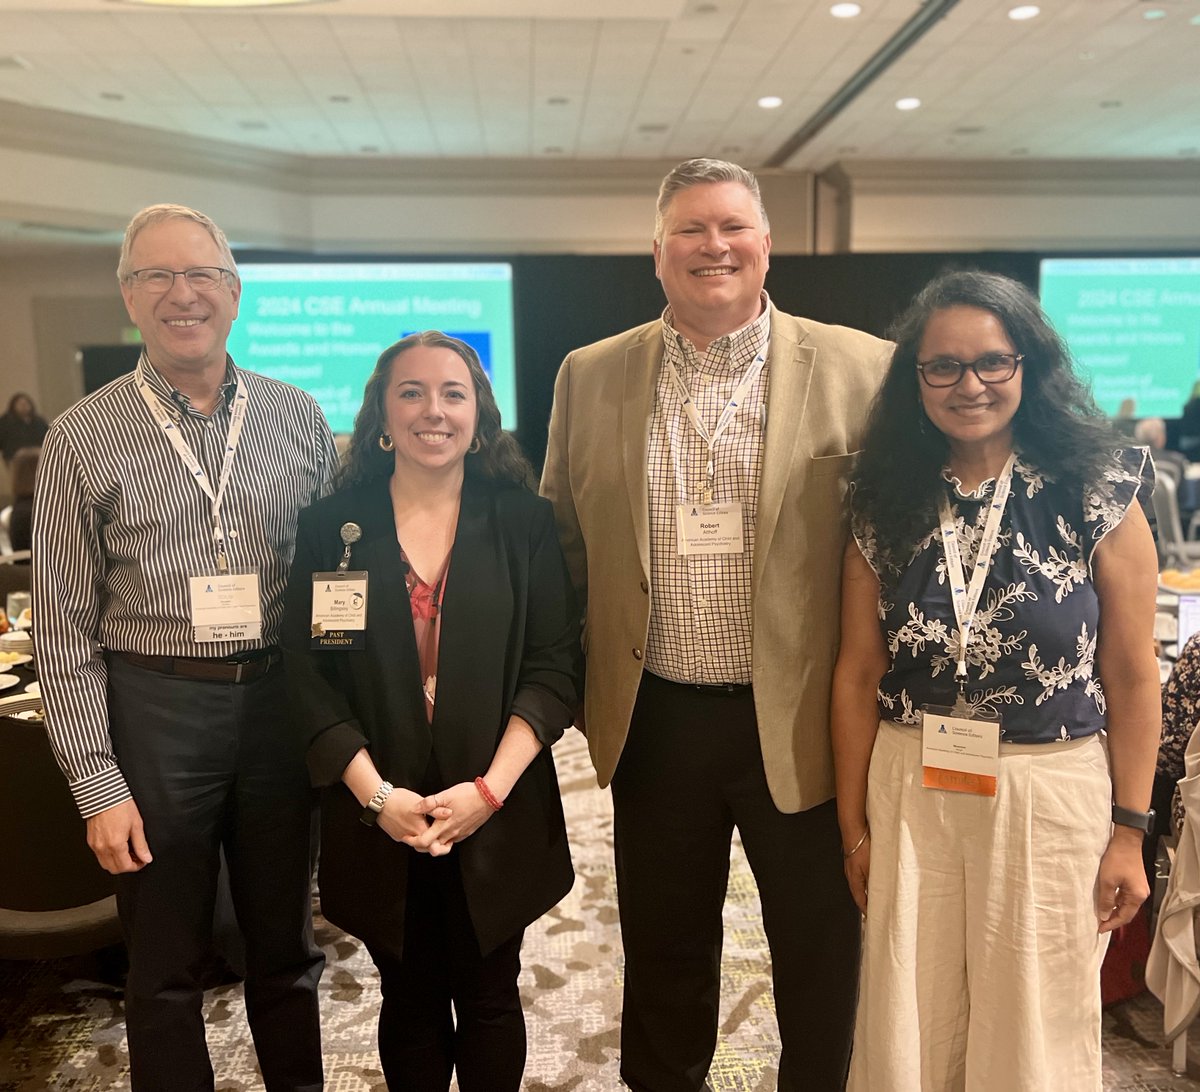 Members of your #JAACAP and #JAACAPOpen editorial team are at #CSE2024 this week learning about best practices and important topics in scholarly publishing and peer review. @CScienceEditors @mkbillingsley_ @childpsychvt @doctorhopemd @JAACAPOpen